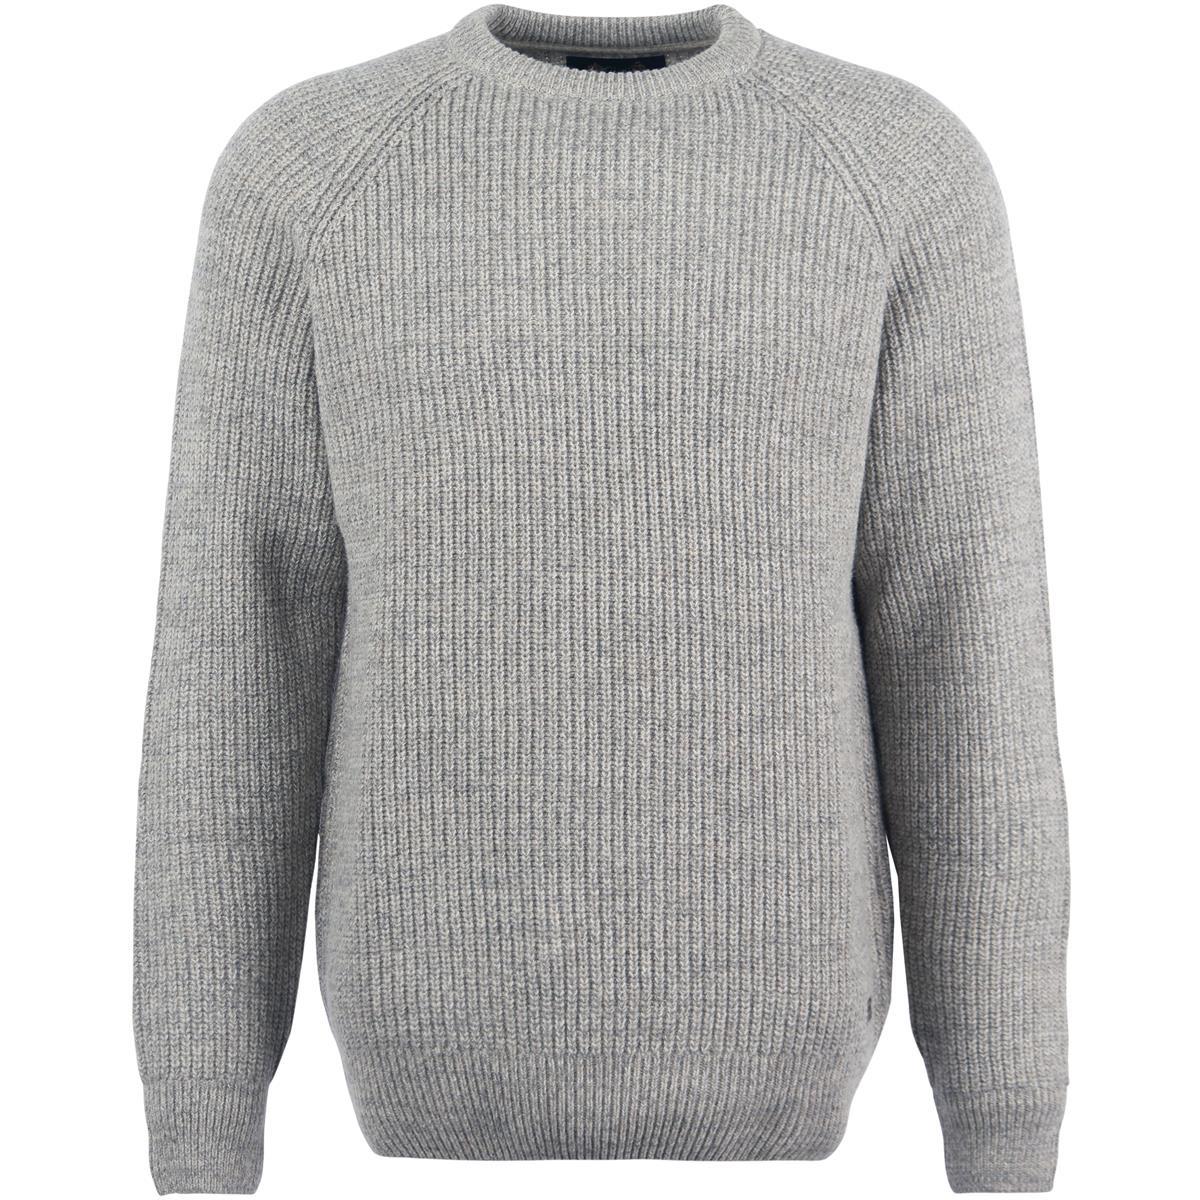 Barbour Mens Horseford Crew Jumper Questions & Answers